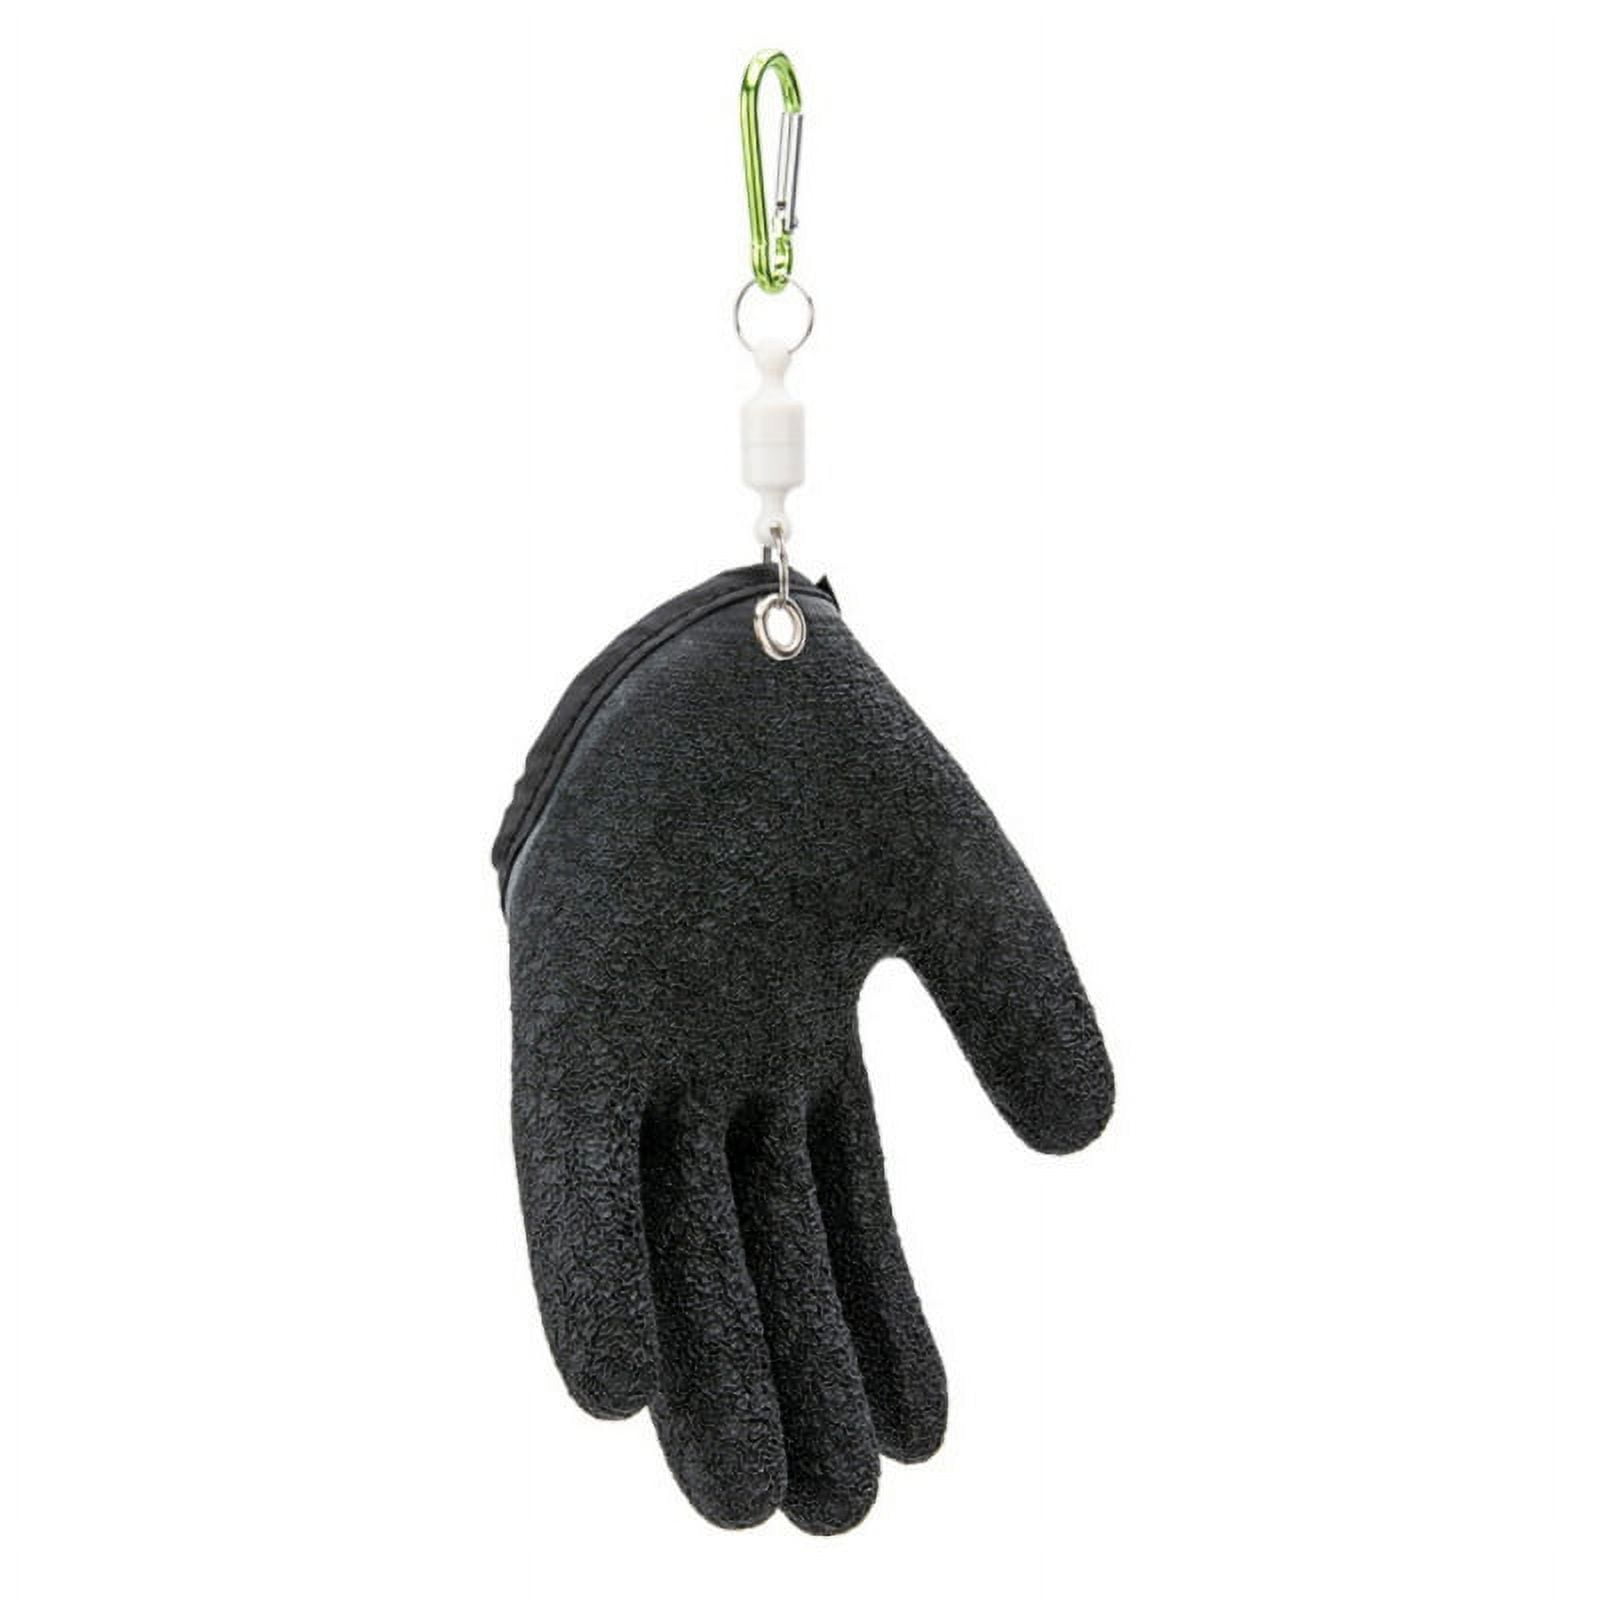 Fishing Glove With Magnet Release Fisherman Professional Catch